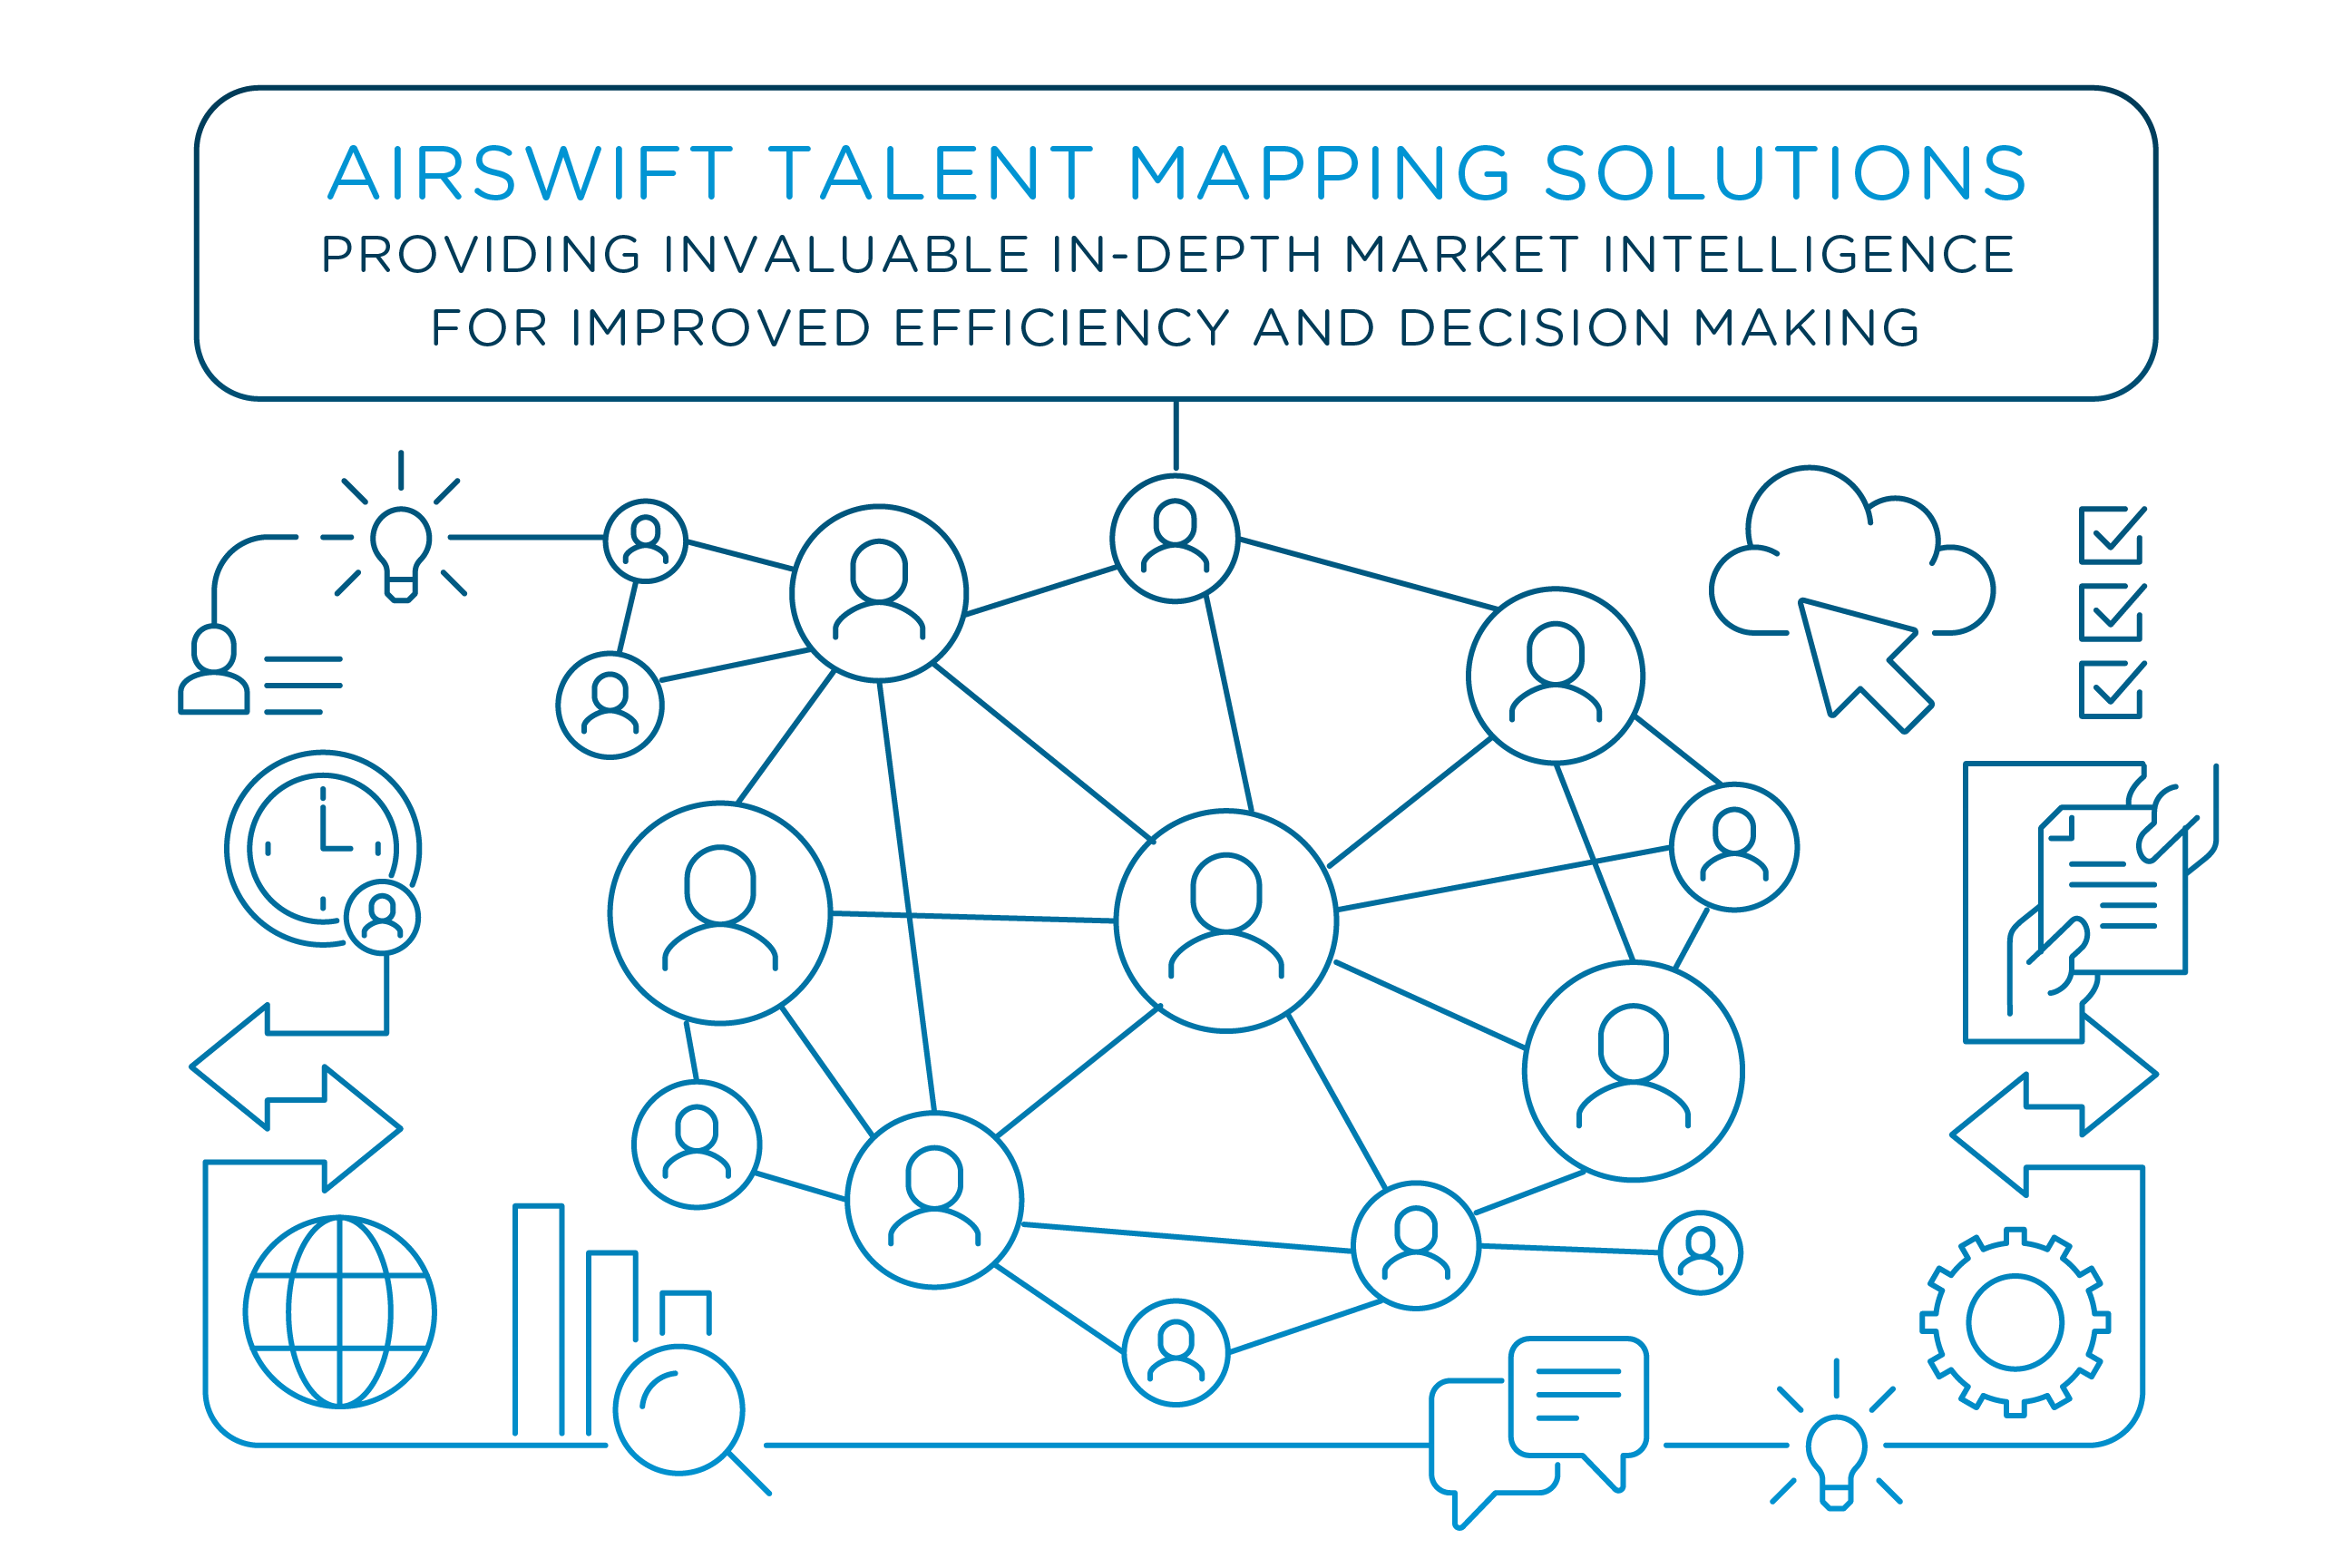 Talent Mapping Research Airswift Consulting Services